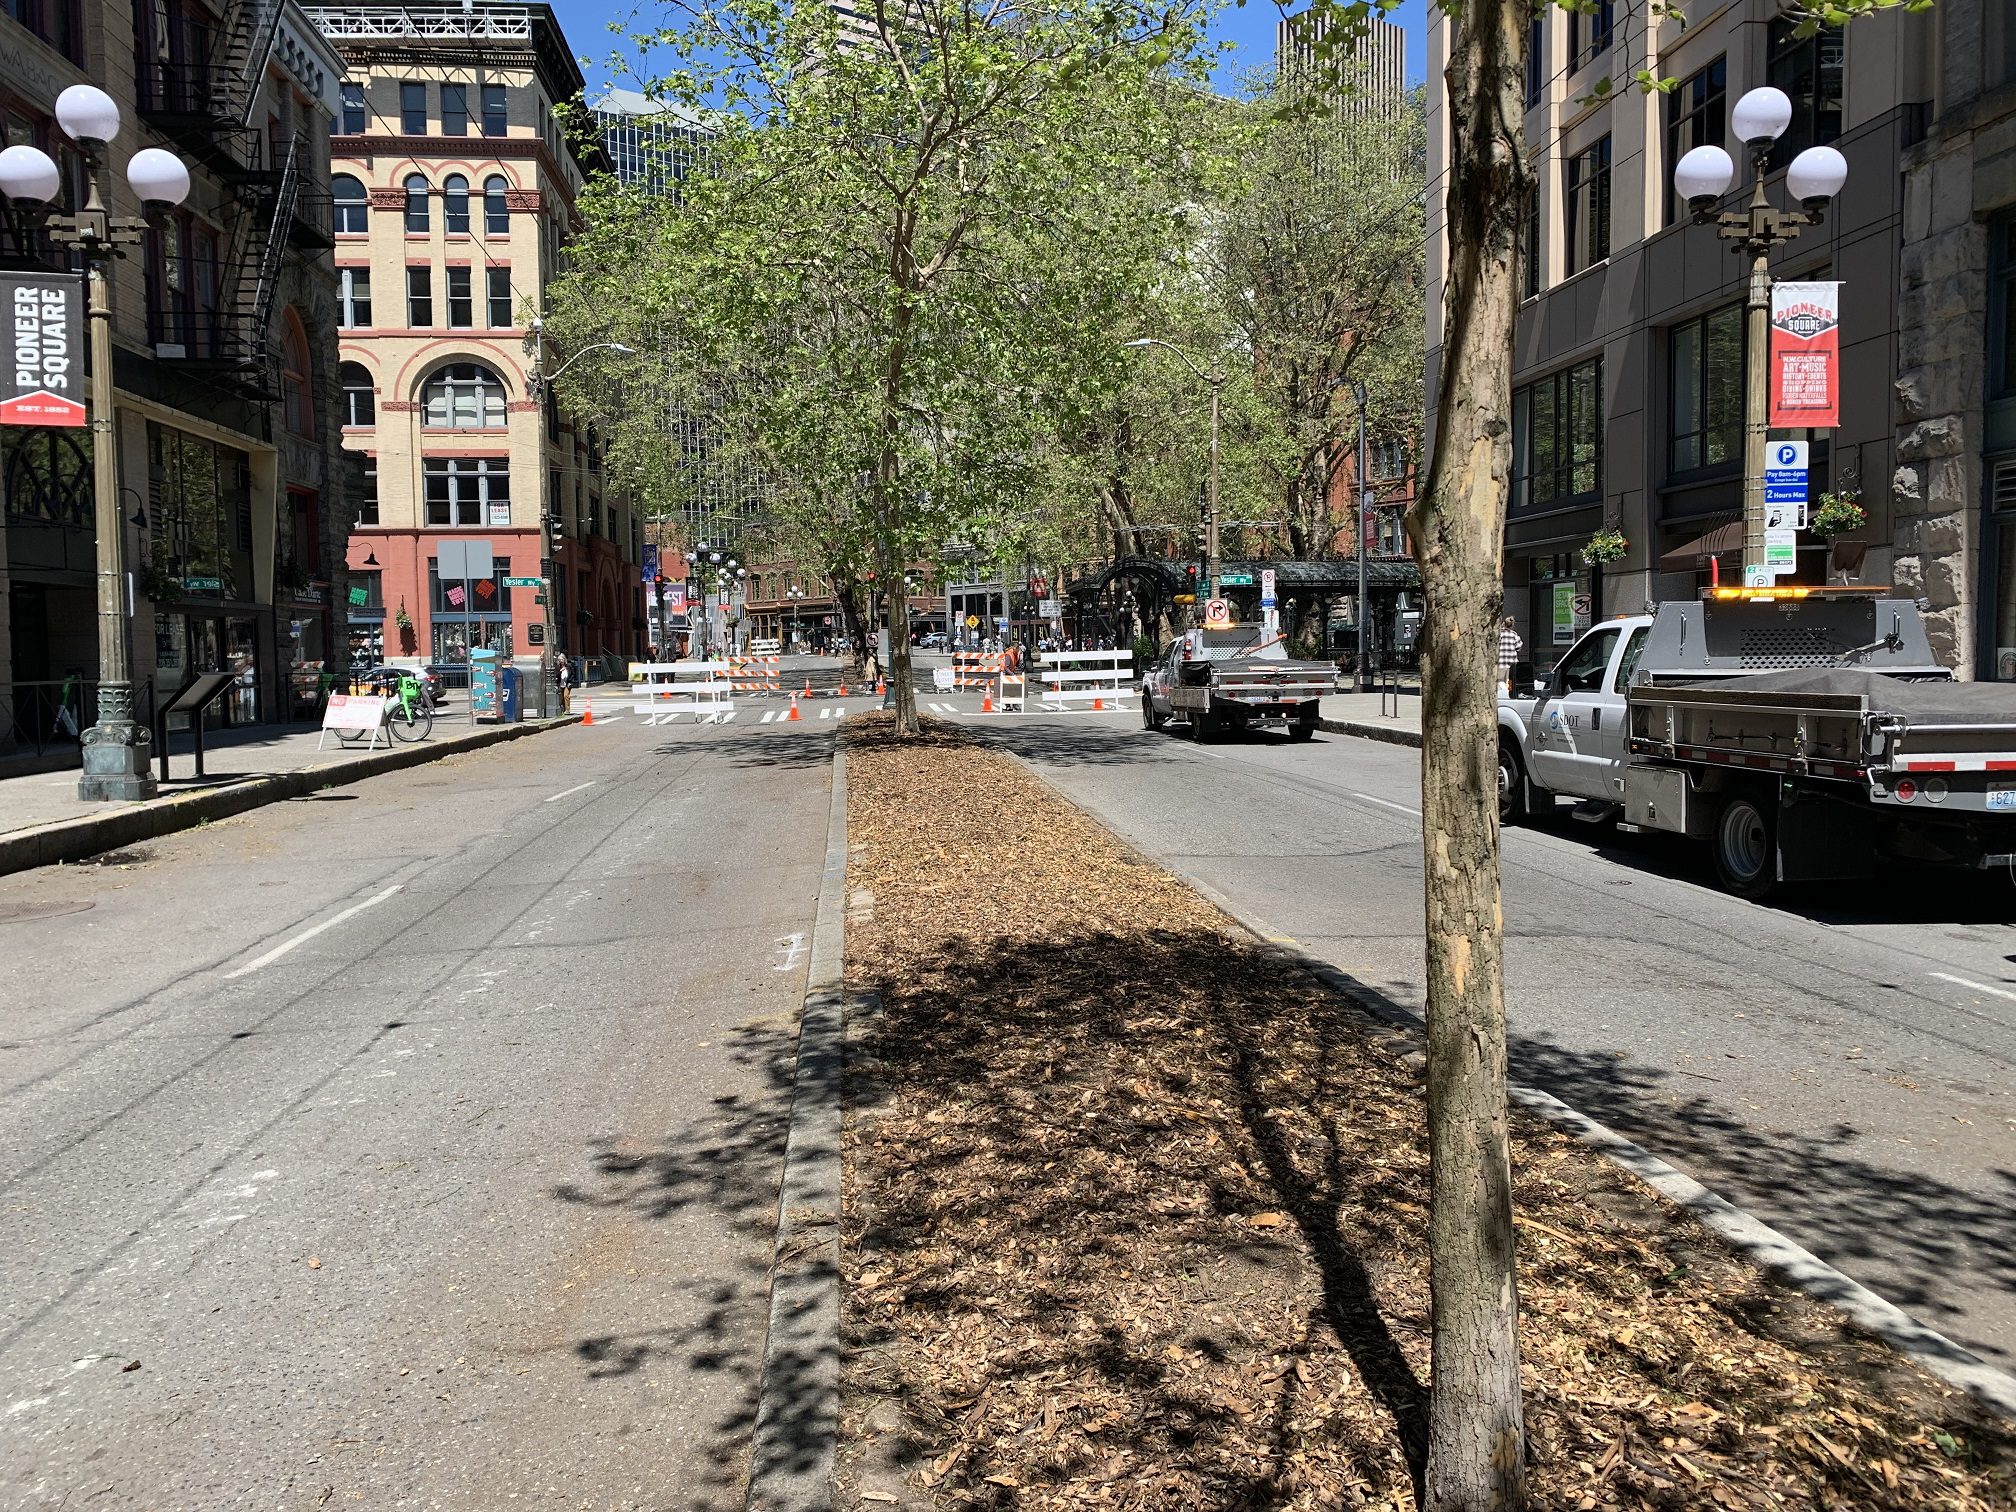 The median along 1st Ave S, after volunteer efforts on May 21.